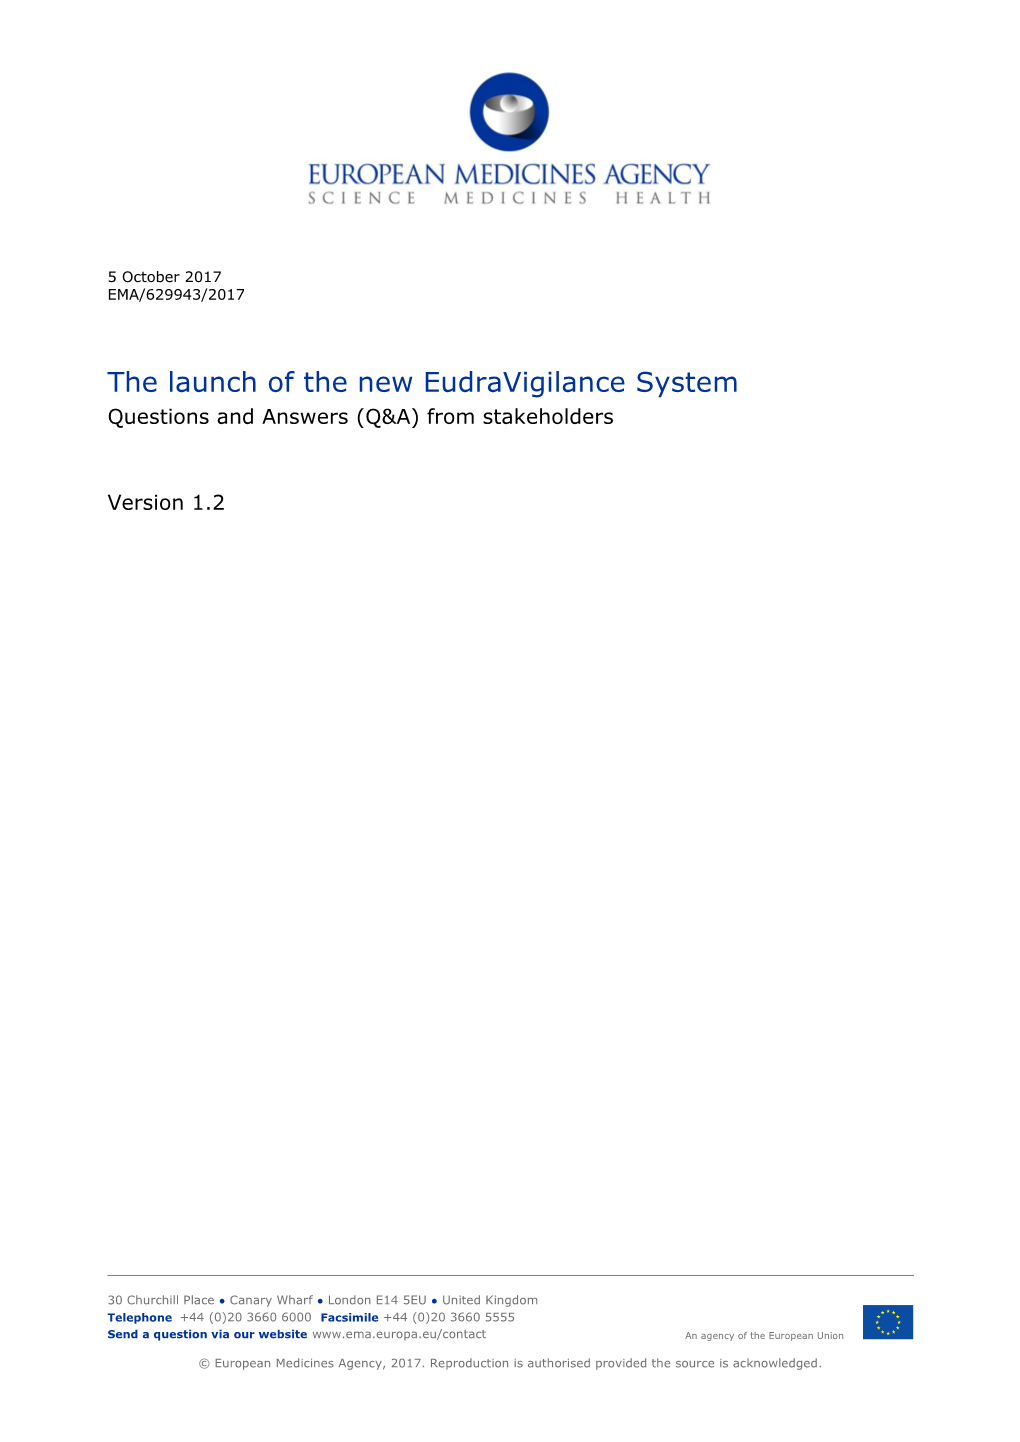 The Launch of the New Eudravigilance System Questions and Answers (Q&A) from Stakeholders